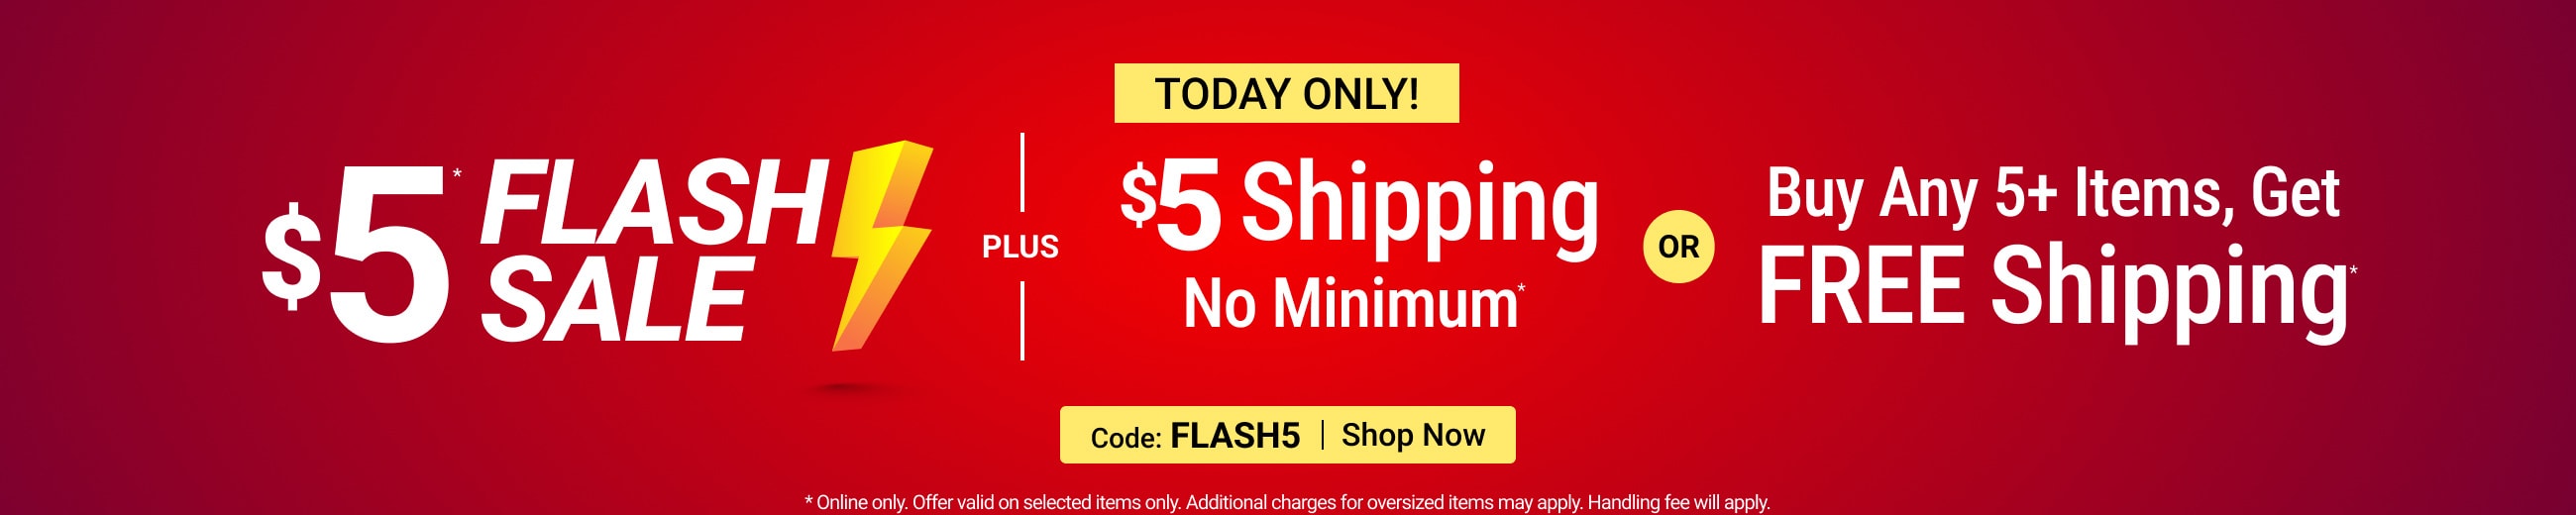 $5 Flash sale plus $5 shipping or buy 5 items get free shipping - shop now